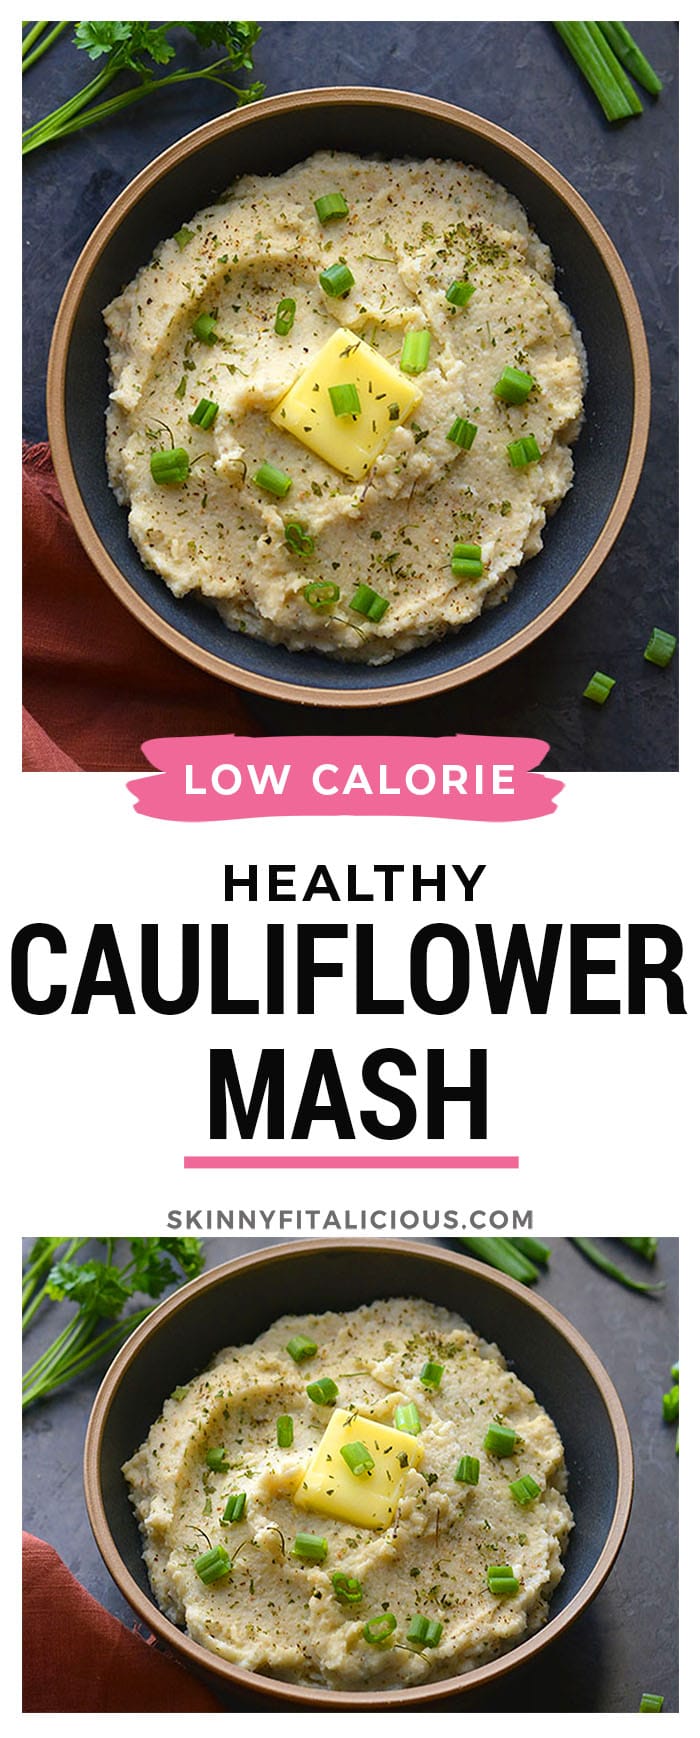 Gluten Free Roasted Garlic Cauliflower Mash! These creamy "potatoes" are a healthy low carb alternative to mashed potatoes. Made with simple, real food ingredients with the same consistency as real potatoes. Whole30 + Low Carb + Paleo + Gluten Free + Vegan + Low Calorie